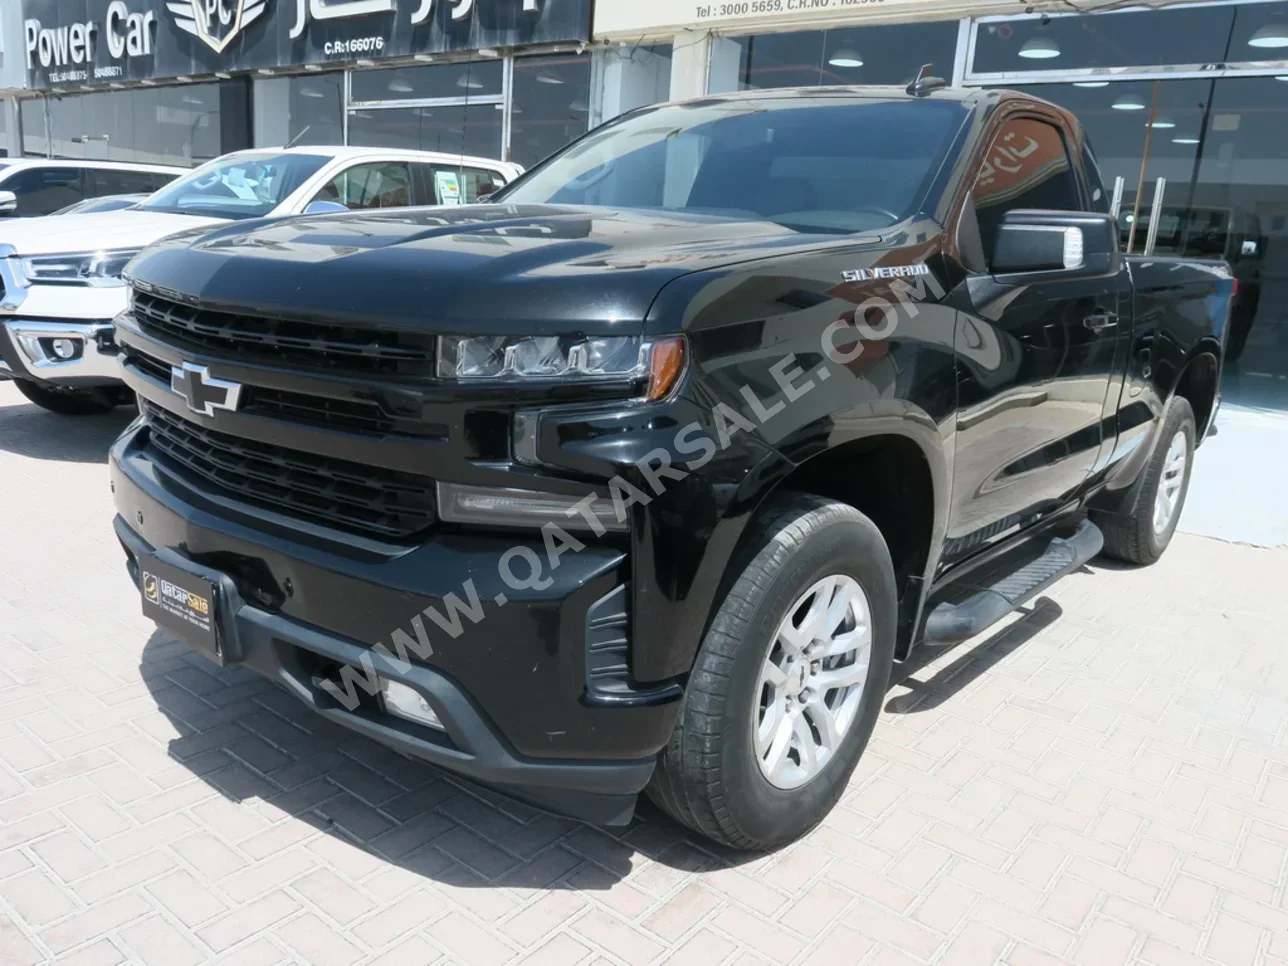 Chevrolet  Silverado  RST  2020  Automatic  120,000 Km  8 Cylinder  Four Wheel Drive (4WD)  Pick Up  Black